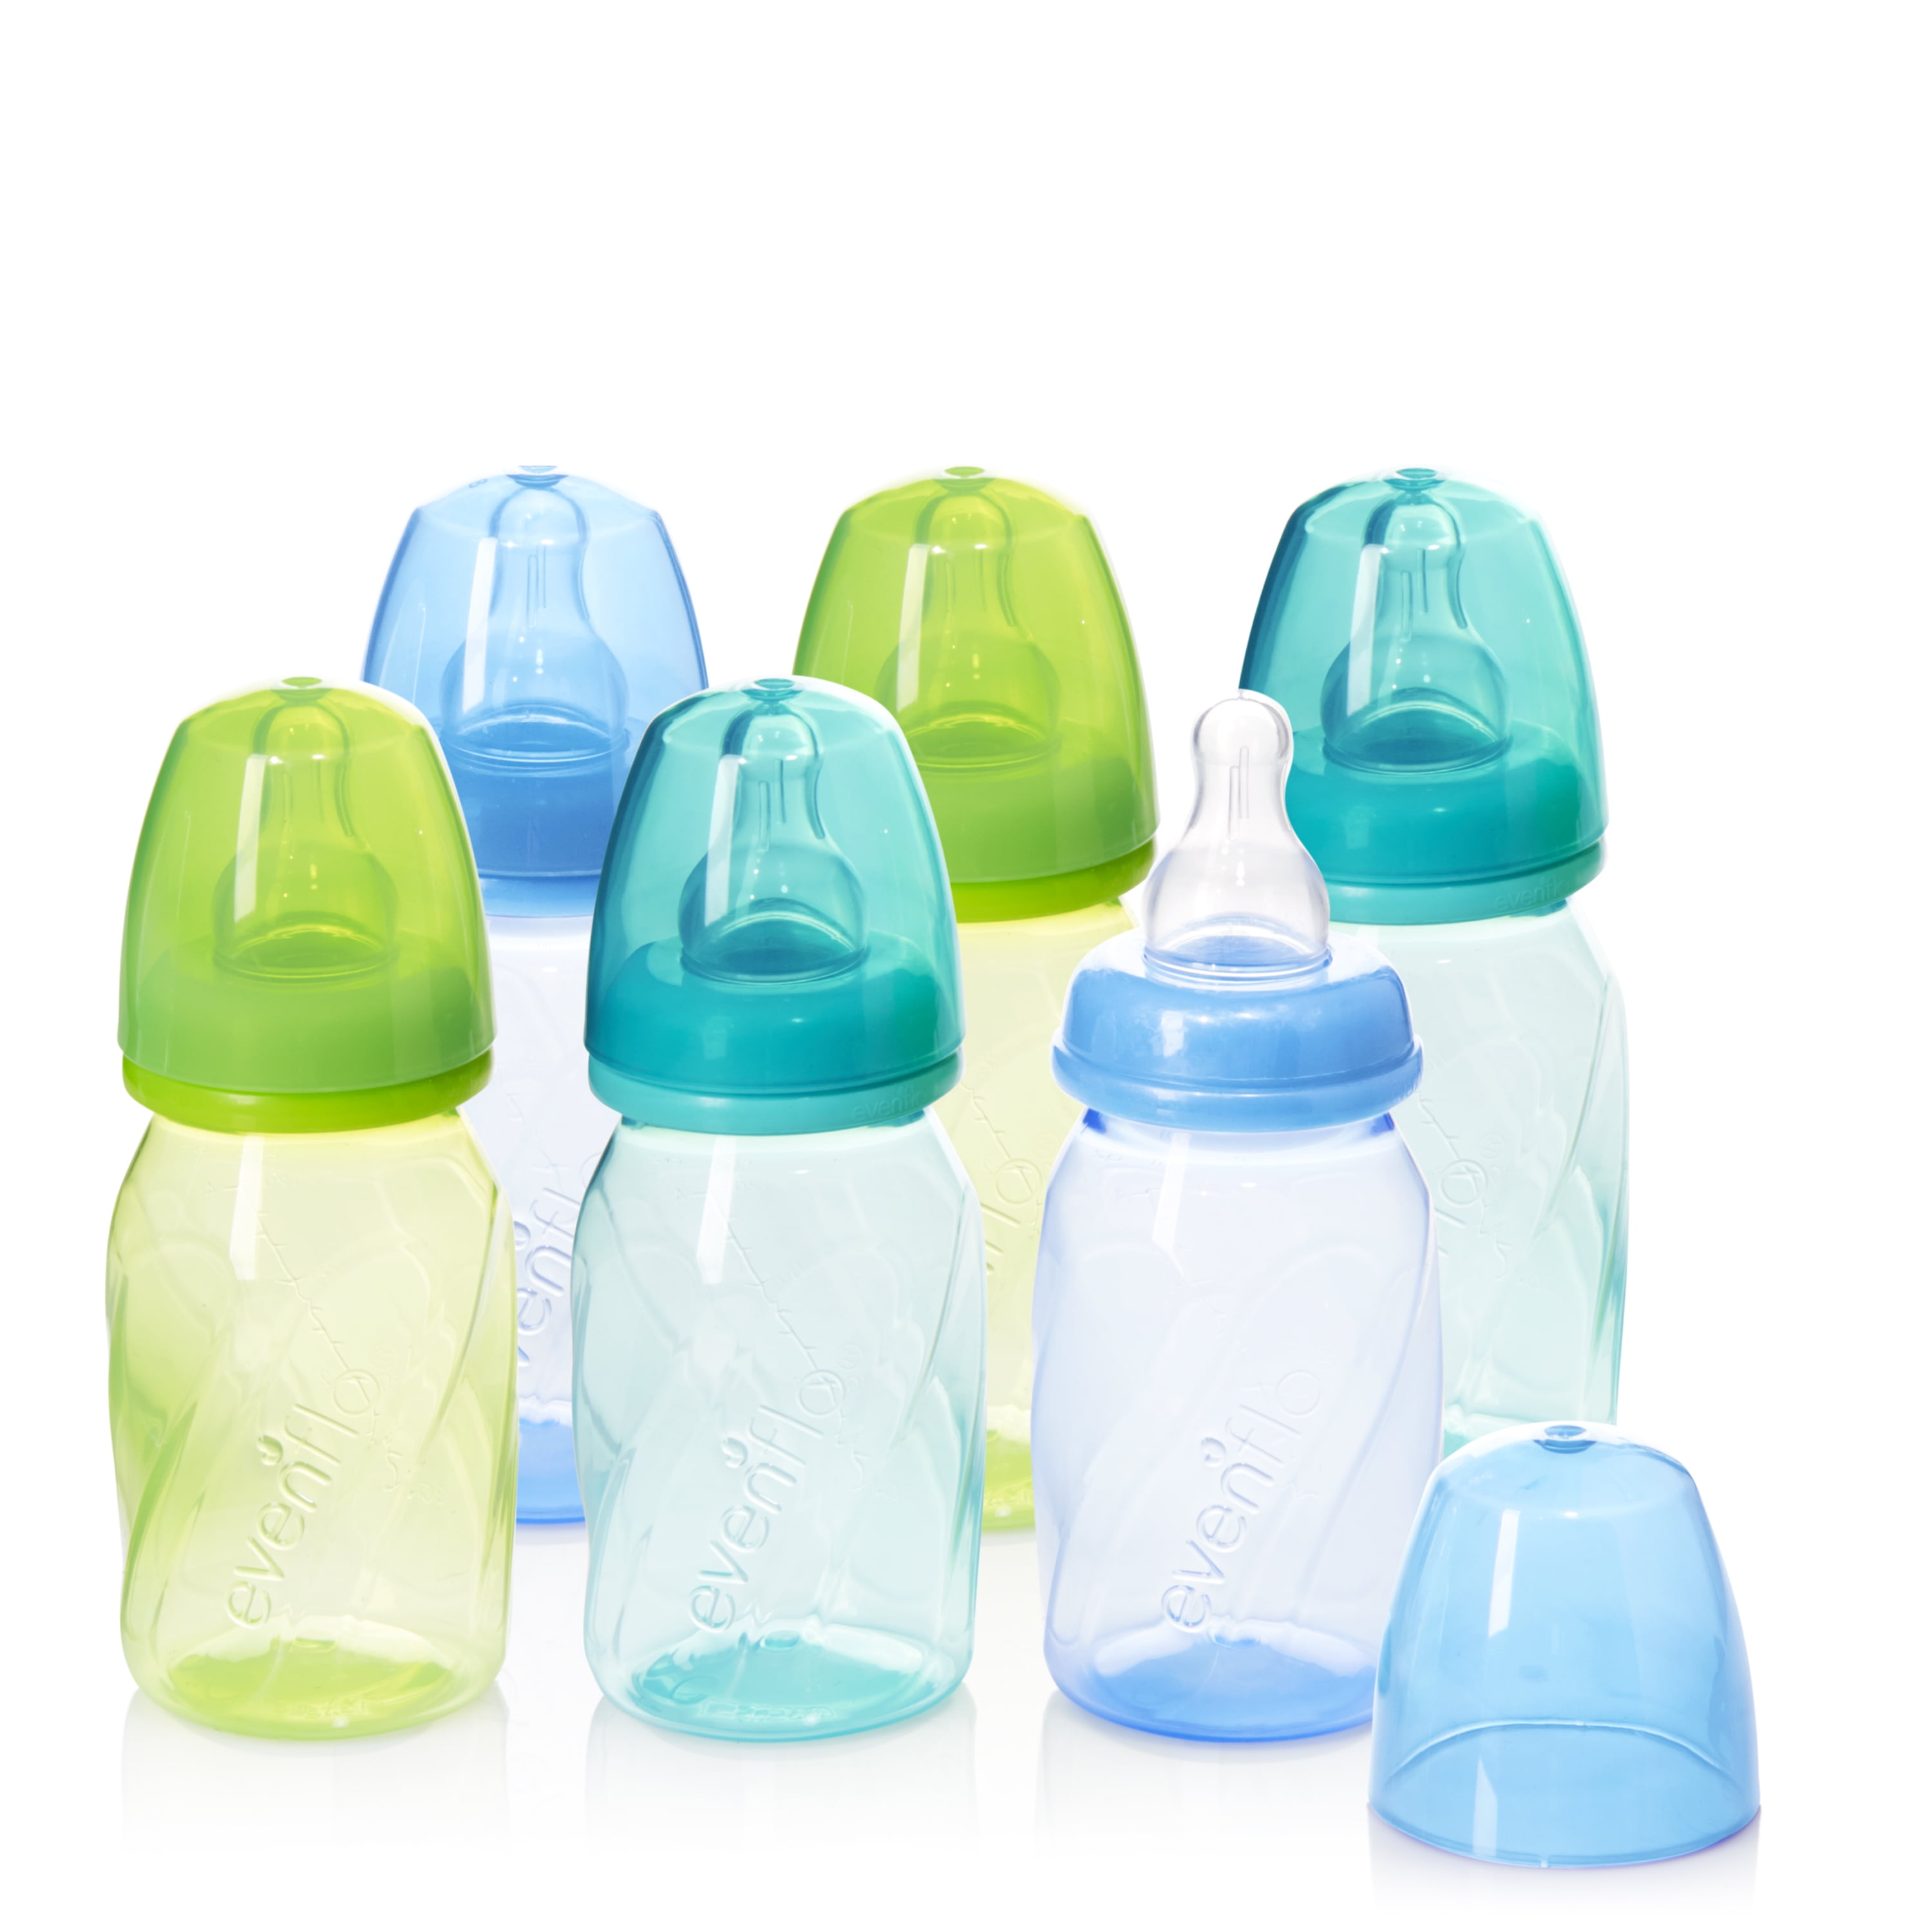 Evenflo Feeding Classic Tinted Plastic Standard Neck Bottles for Baby, Infant and Newborn, Pink/Lavender/Teal, 8 Ounce (Pack of 12)